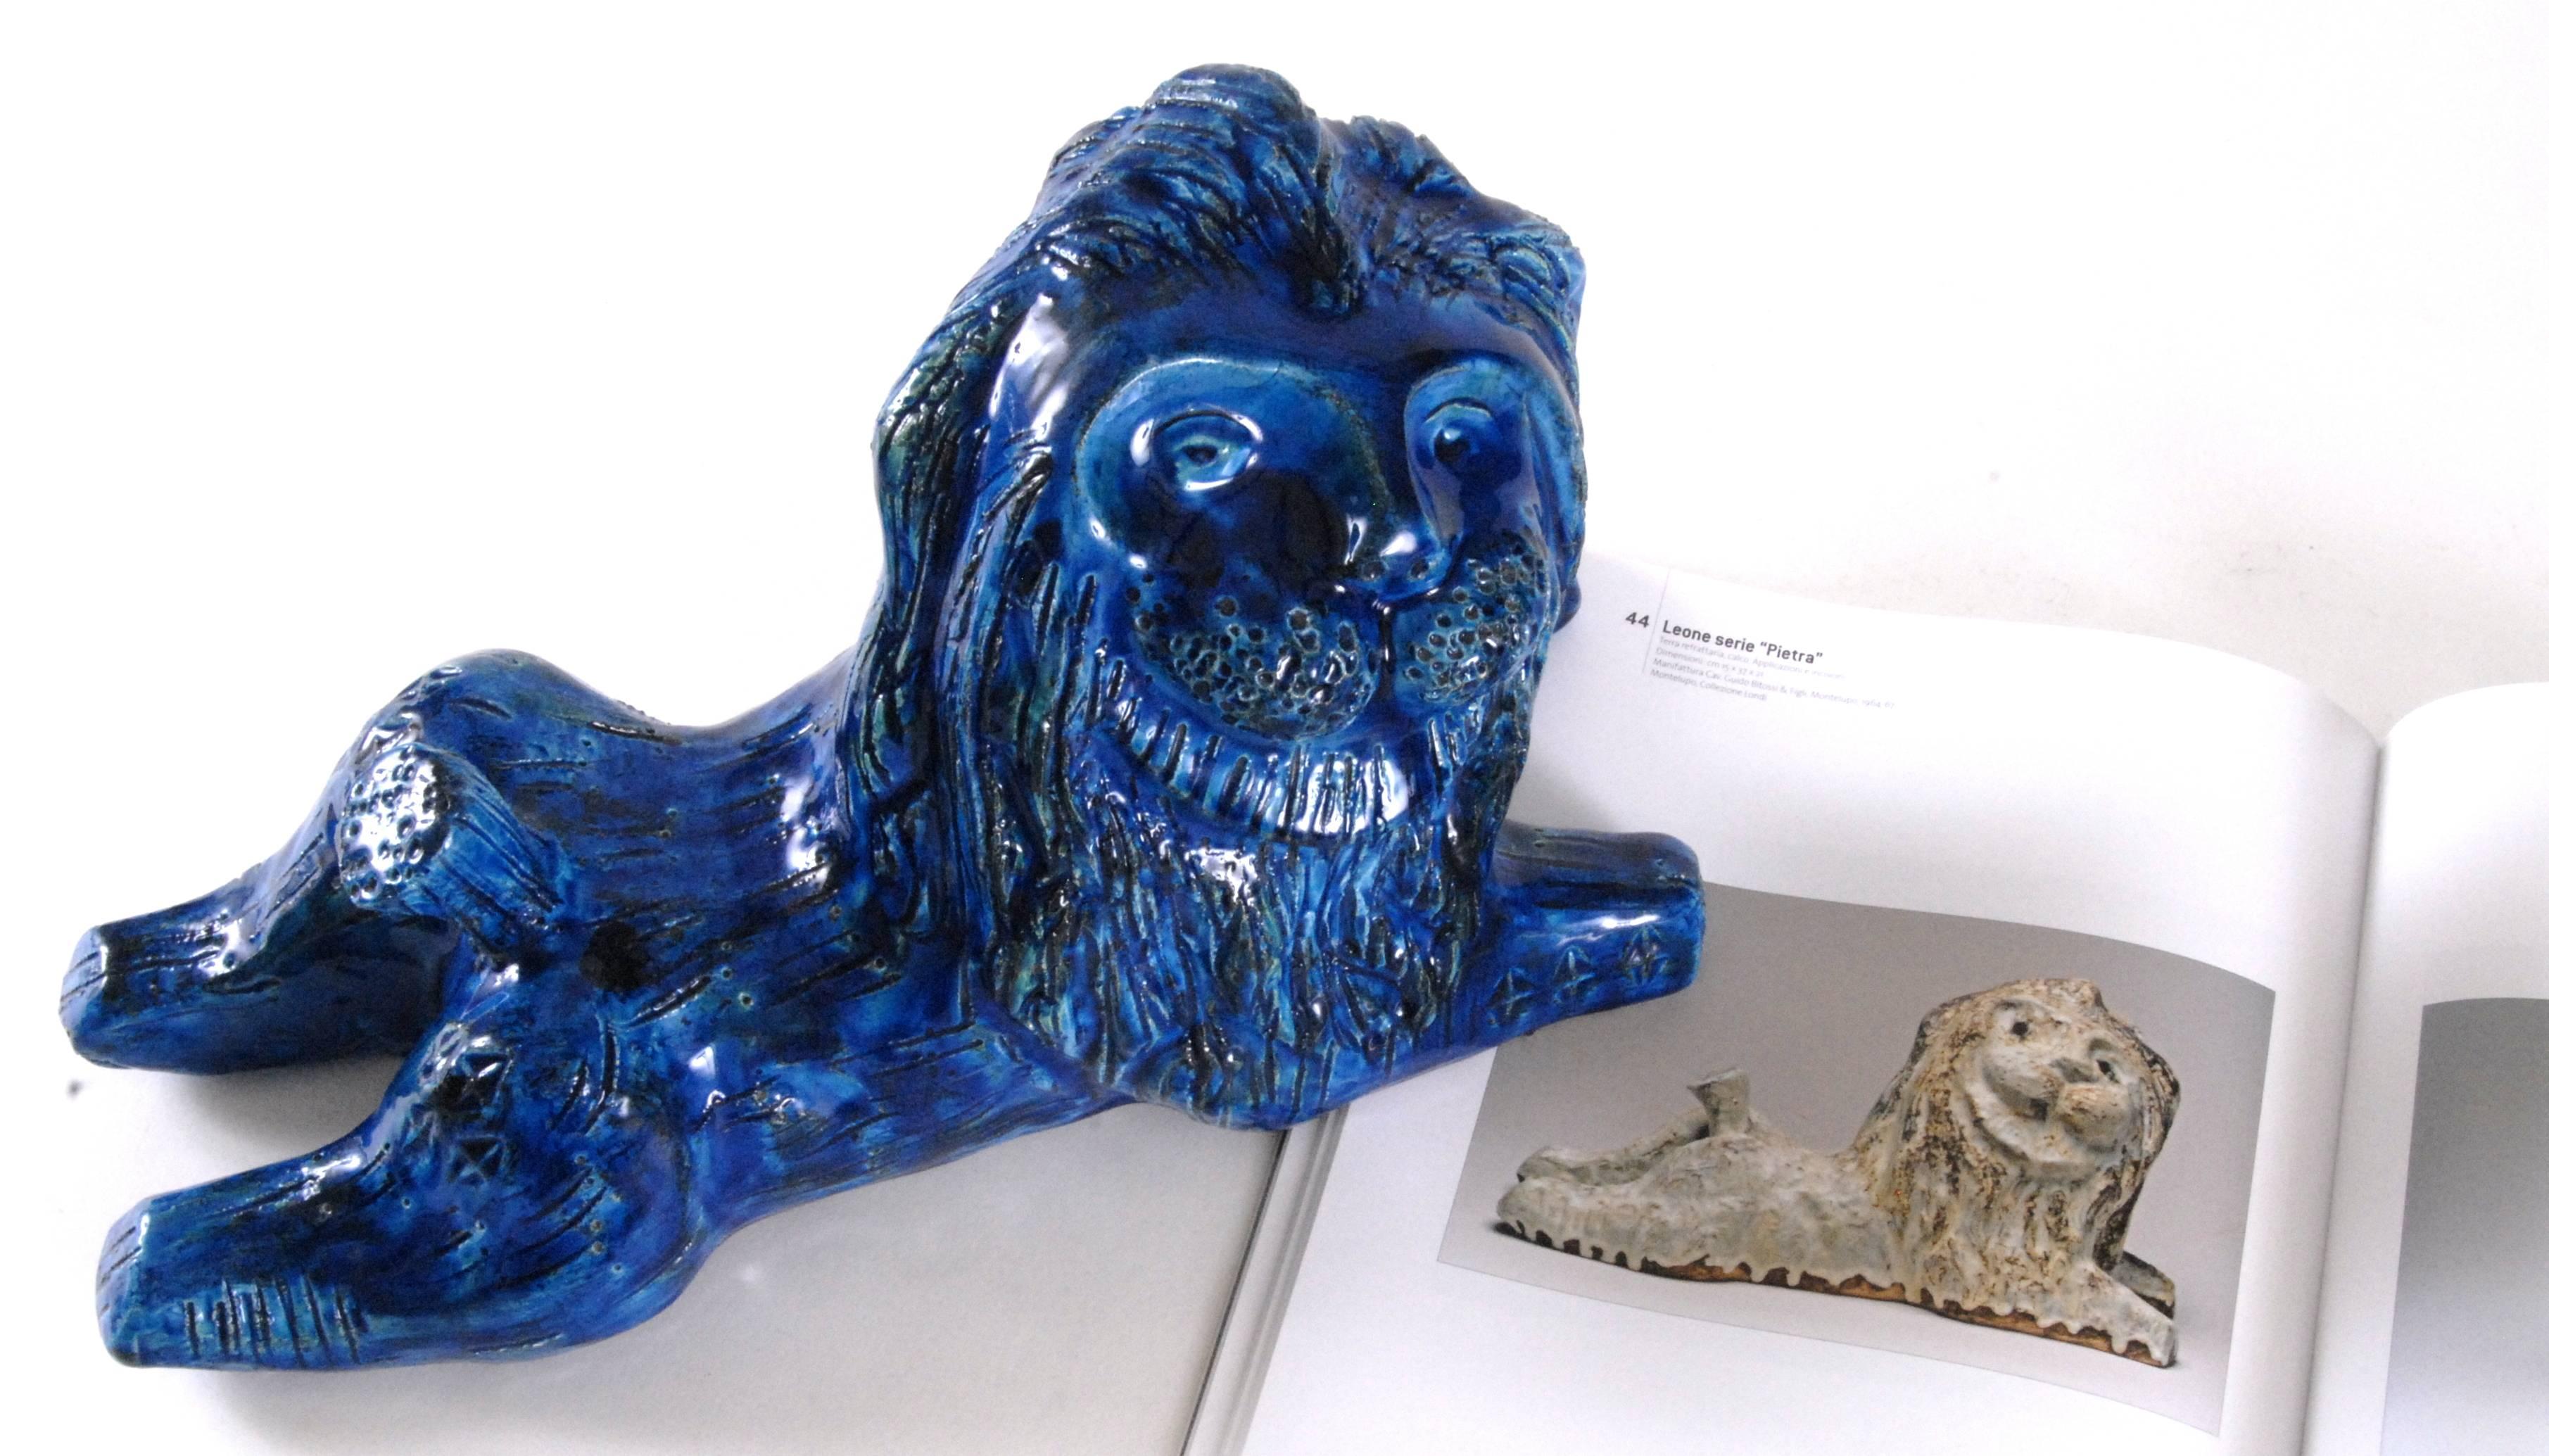 An early Aldo Londi designed Lion, circa 1964-1967, known as 'Pietra.' Shown illustrated in the catalogue about Londi's work in another color way. This example is in 'Rimini Blu.'